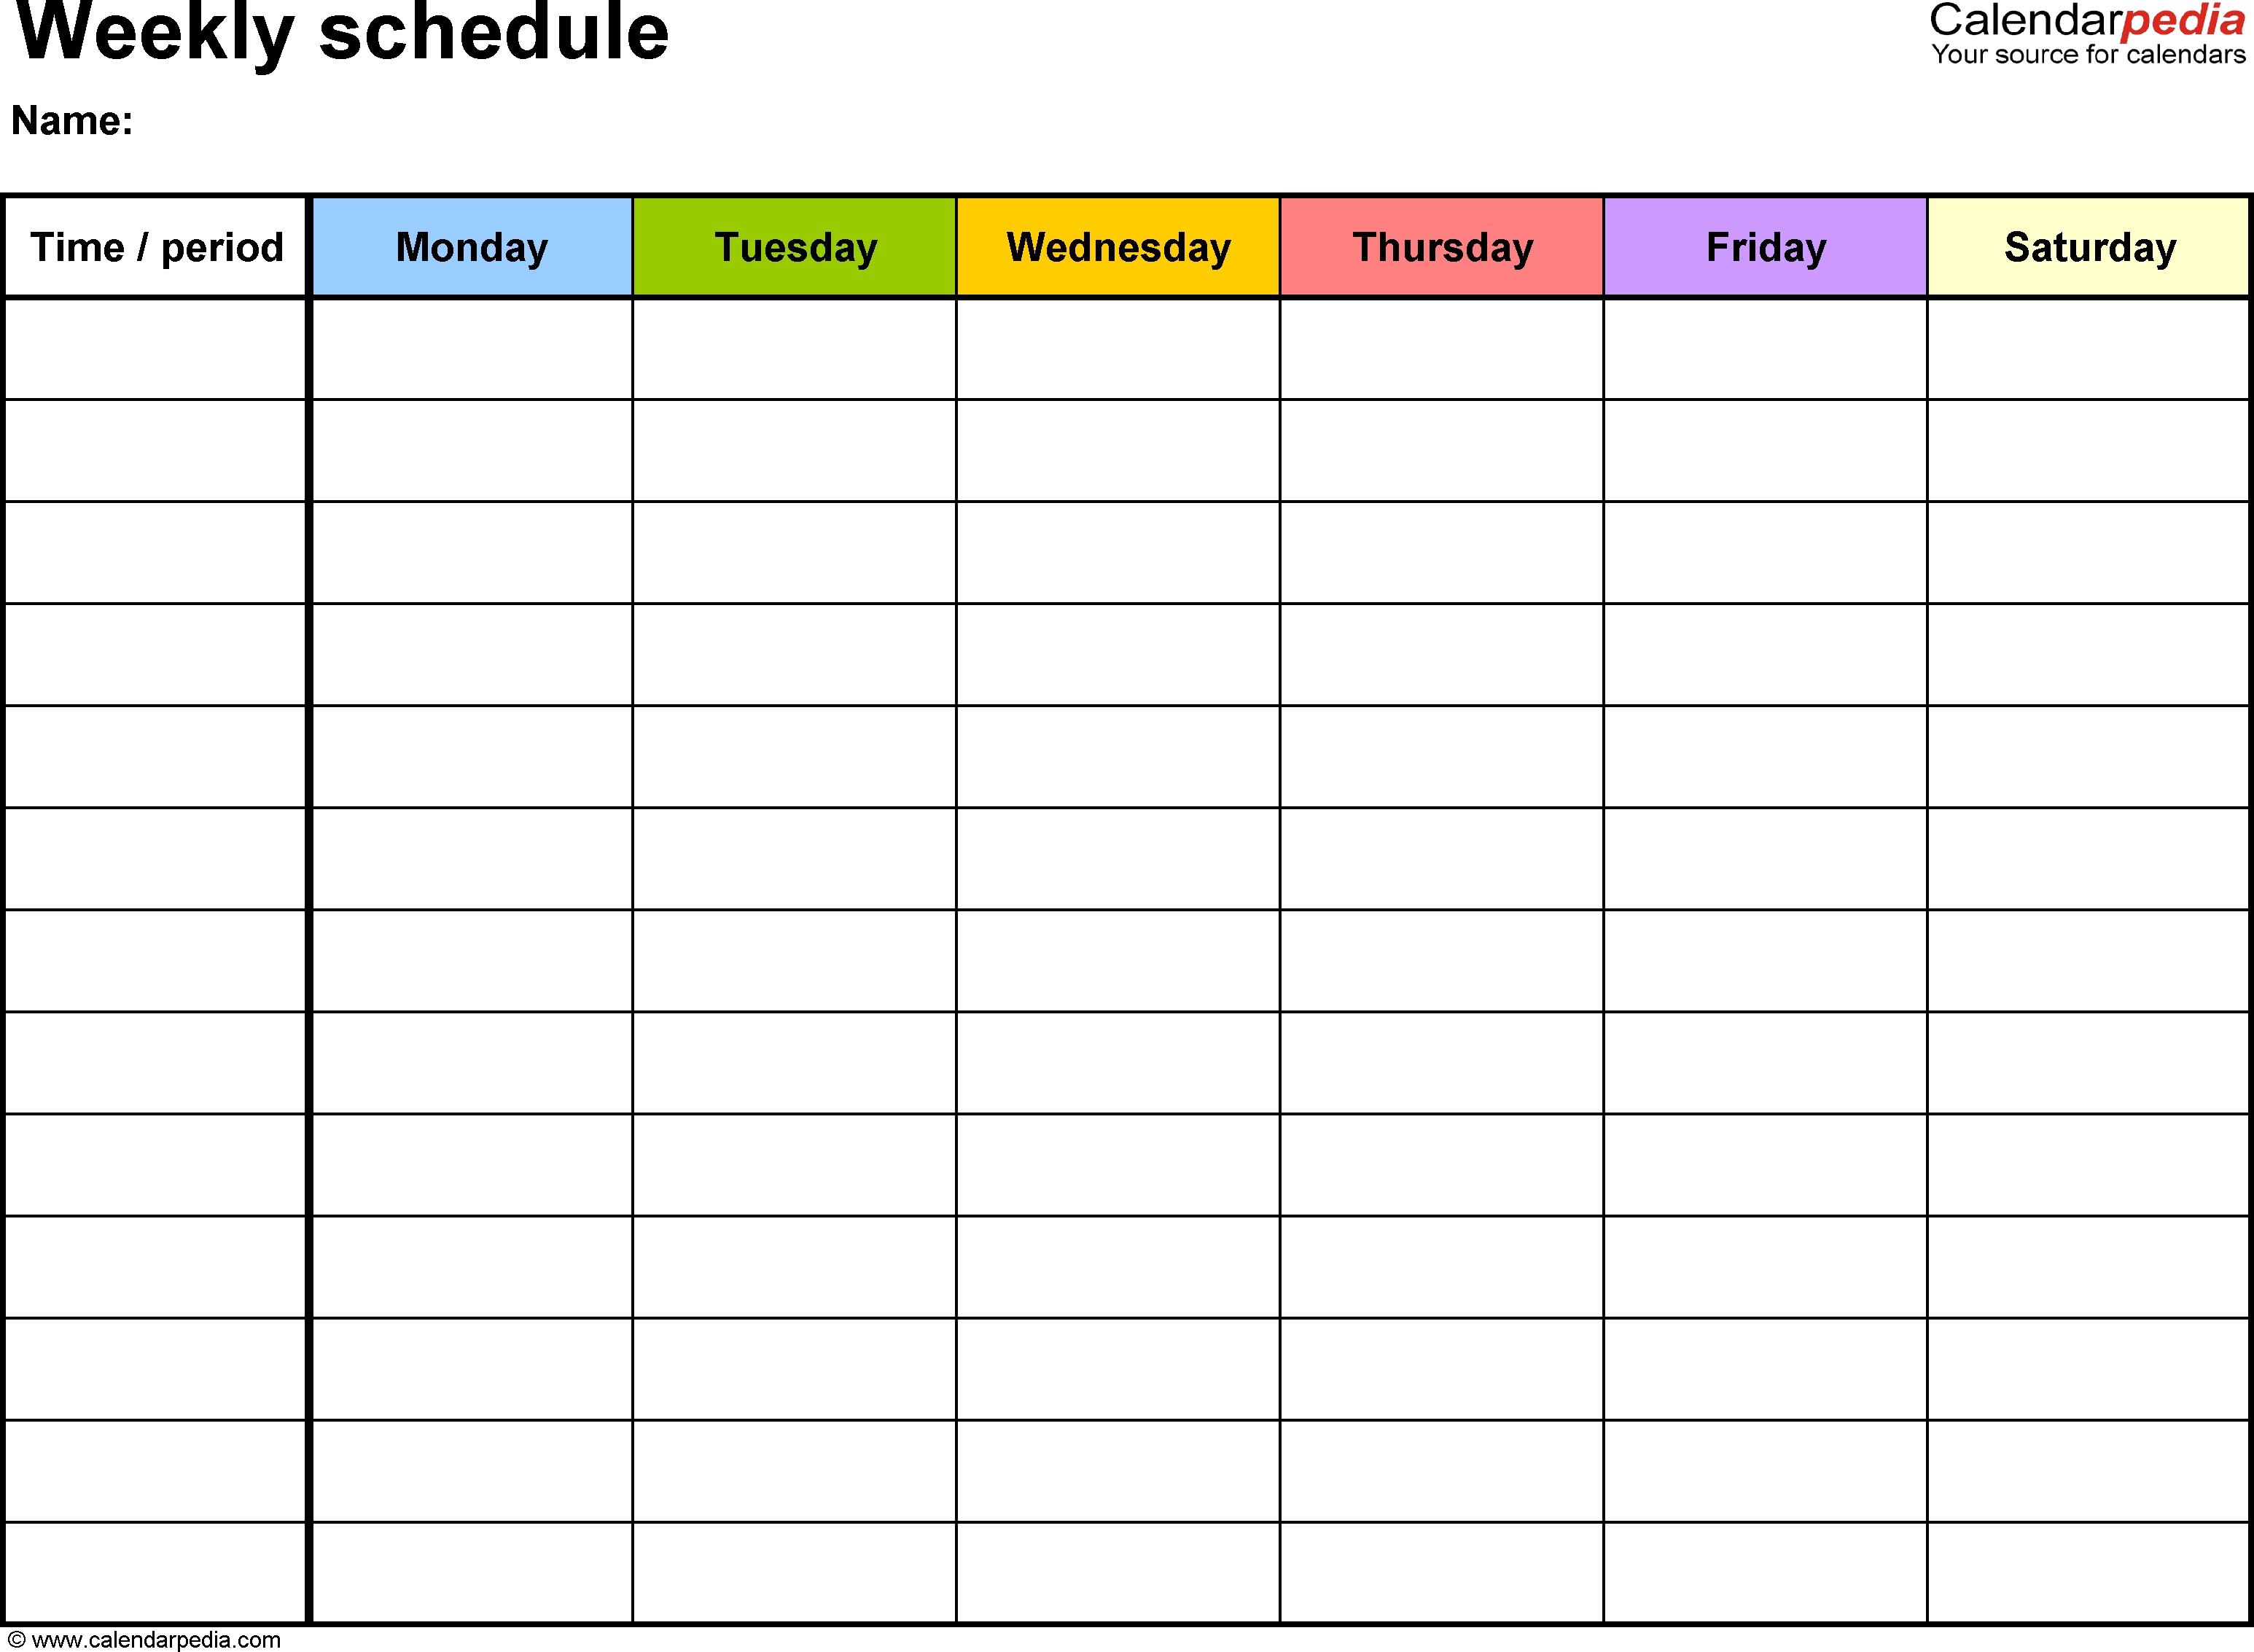 Free Weekly Schedule Templates For Word - 18 Templates-Blank Calendar Five Day